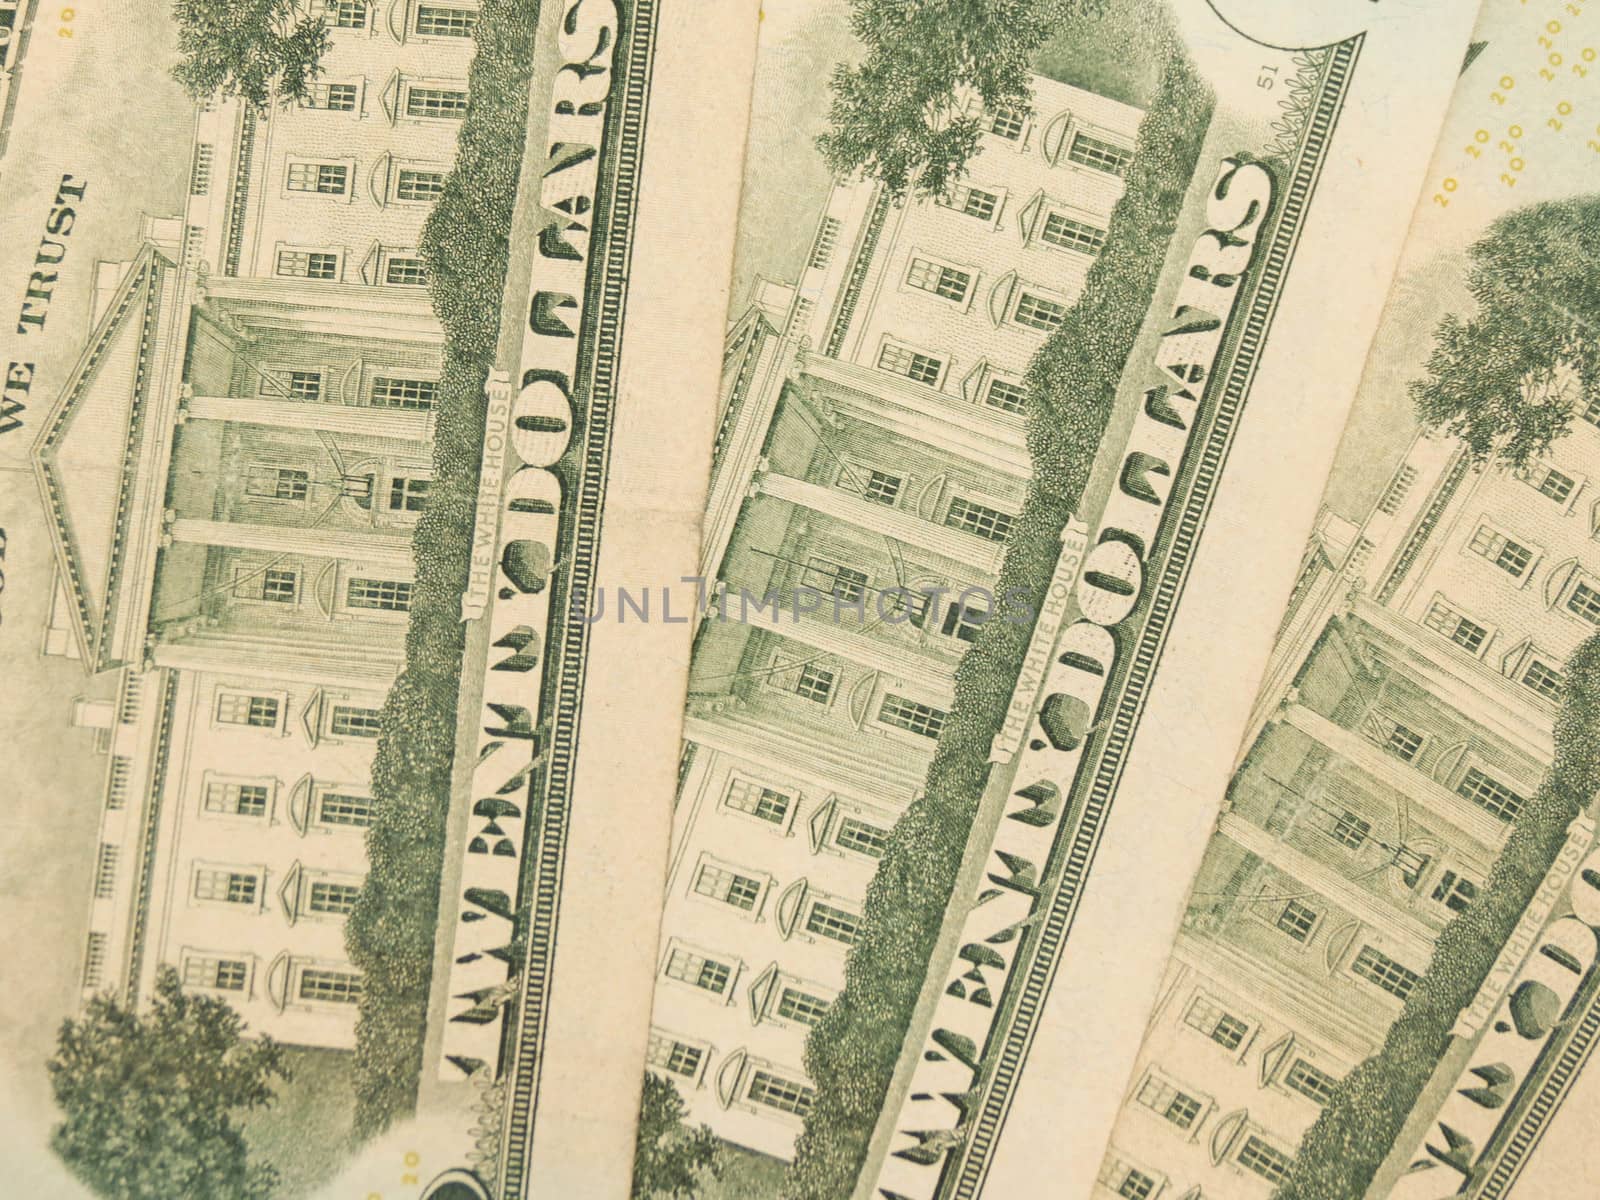 US dollar banknotes - twenty-dollar bill featuring the White House on the back side